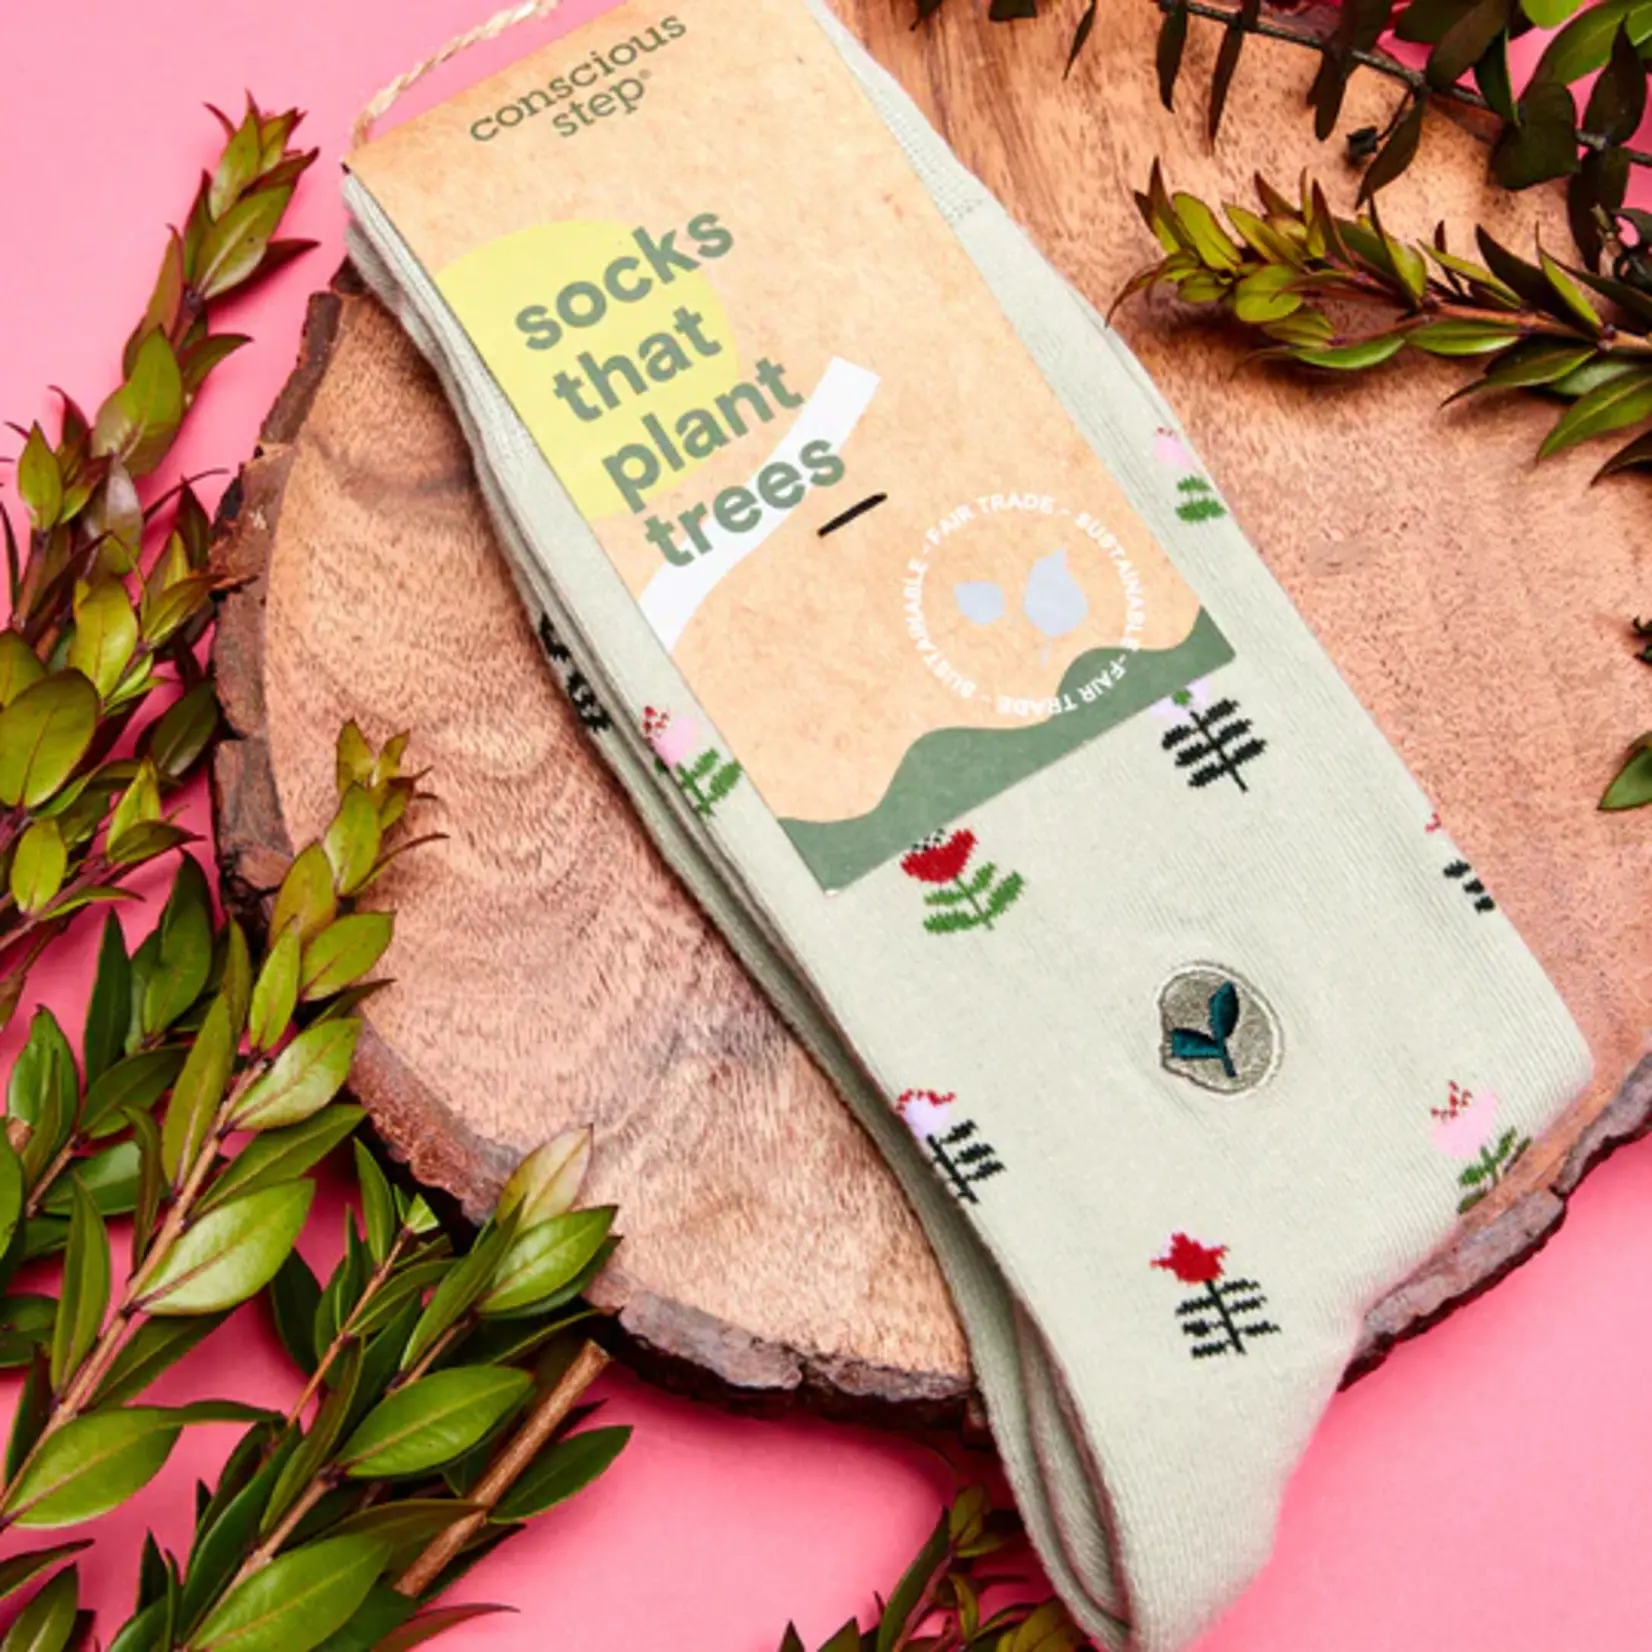 Conscious Step Socks that Plant Trees | Small | Green